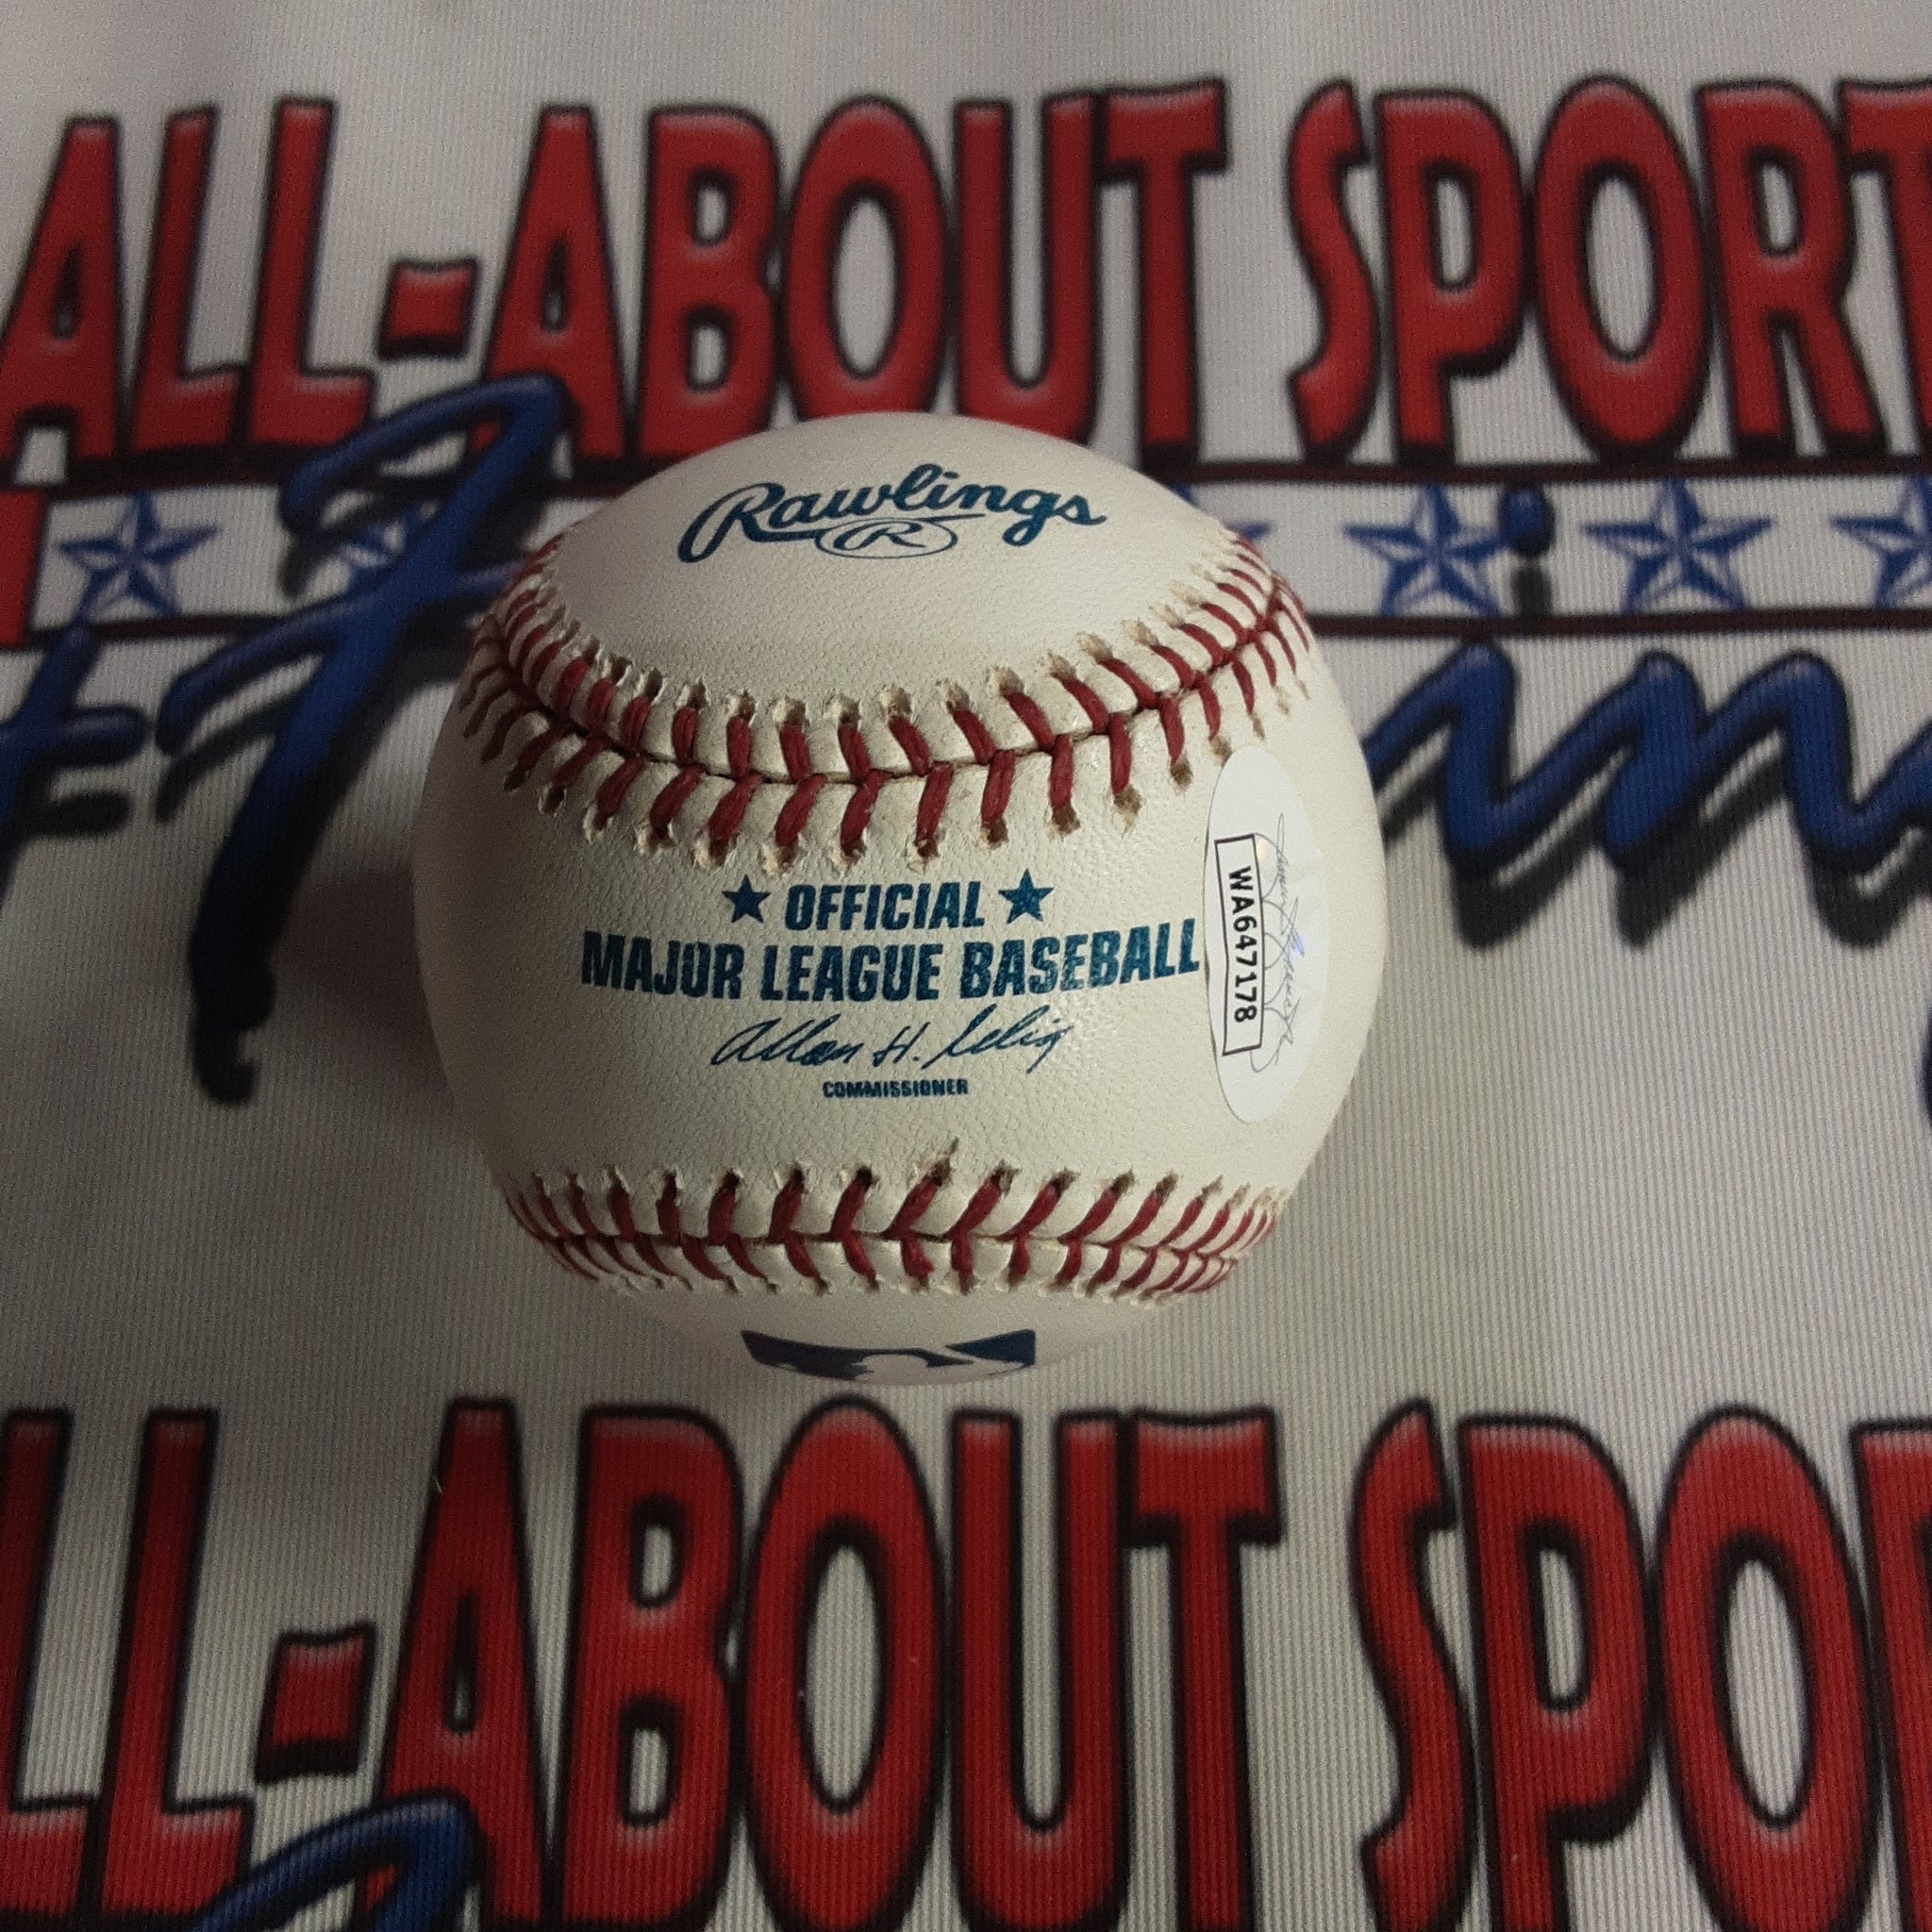 Nasty Boys Brian Knobbs and Jerry Sags Autographed Signed Baseball with Inscription JSA.